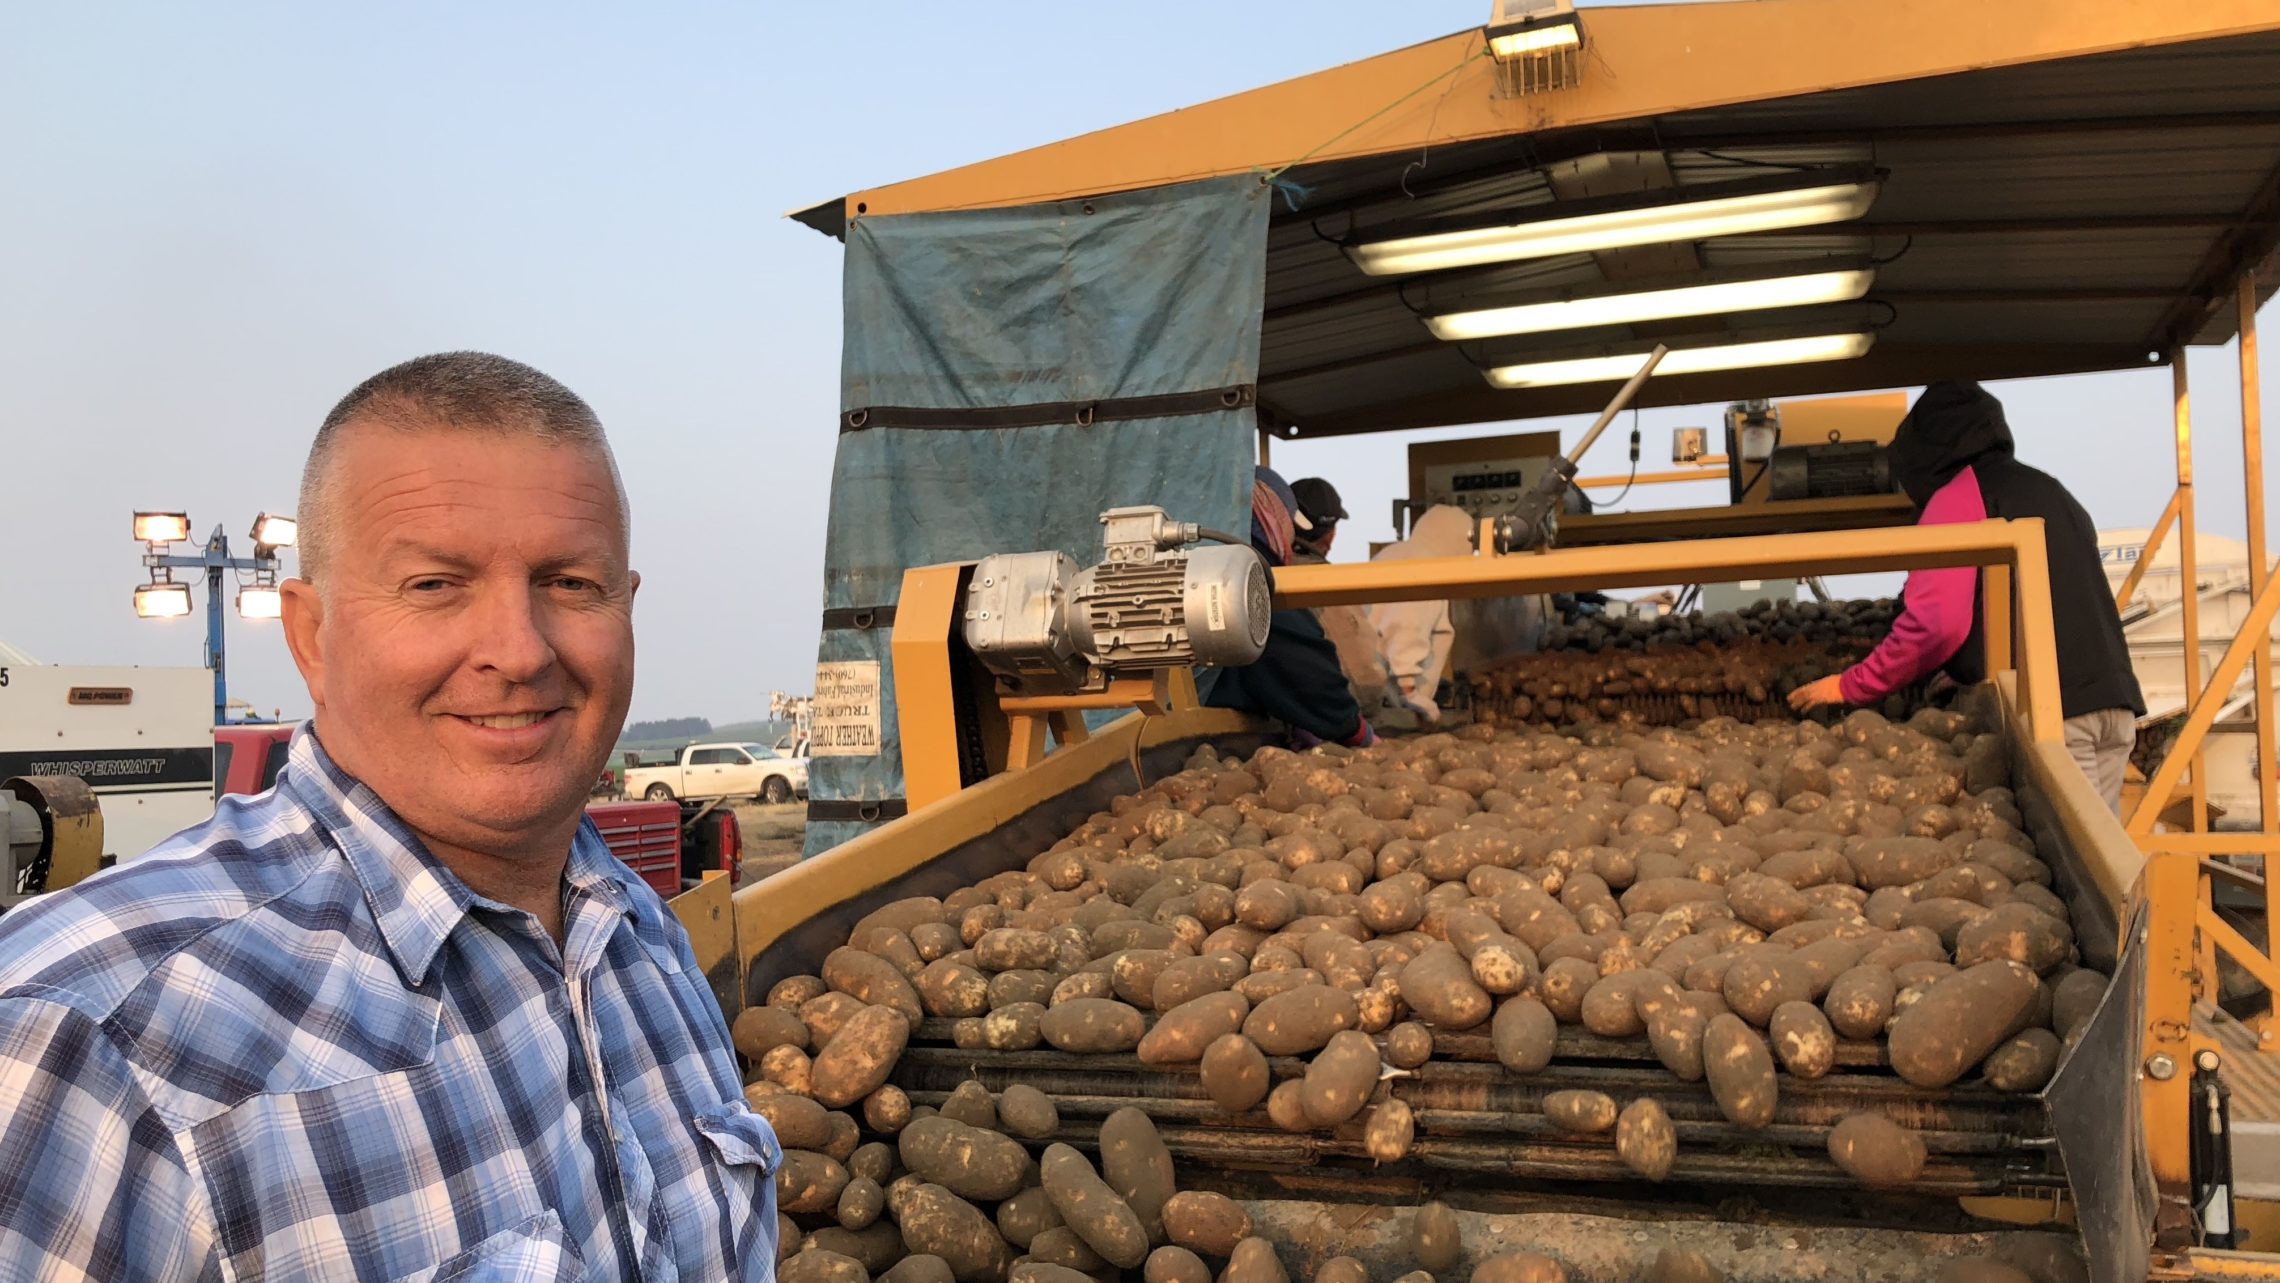 Mike Pink owns about 1,600 acres of potatoes. He says he can’t afford a week of smoky conditions that might stall his crop. CREDIT: ANNA KING/N3